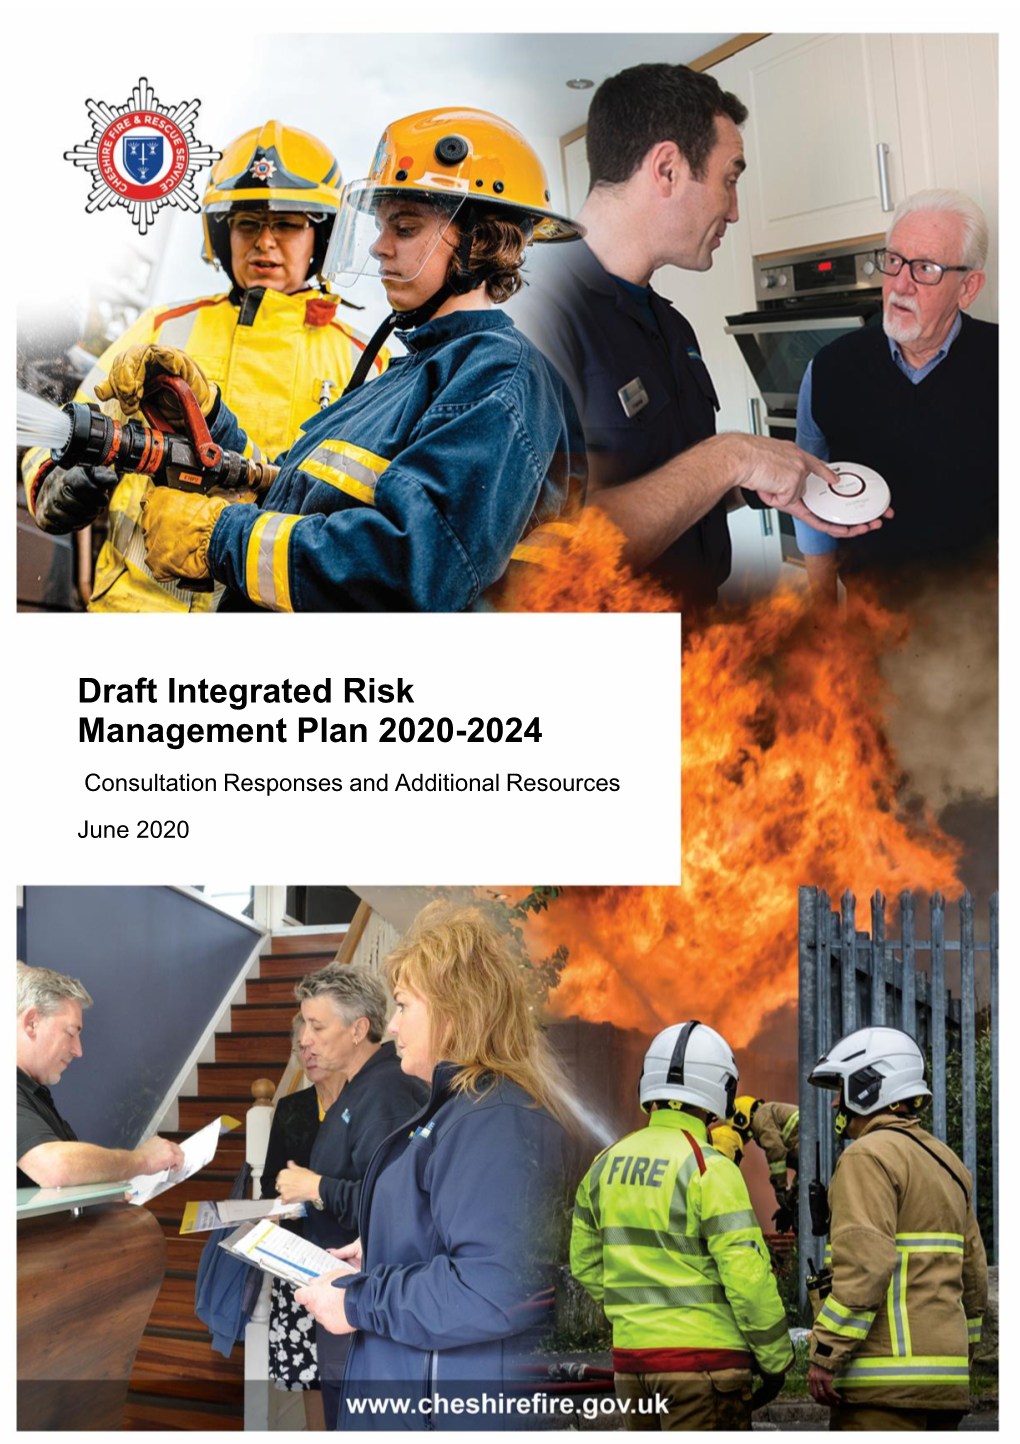 Cheshire Fire Authority Draft IRMP 2020-2024 Consultation Additional Resources and Consultation Responses